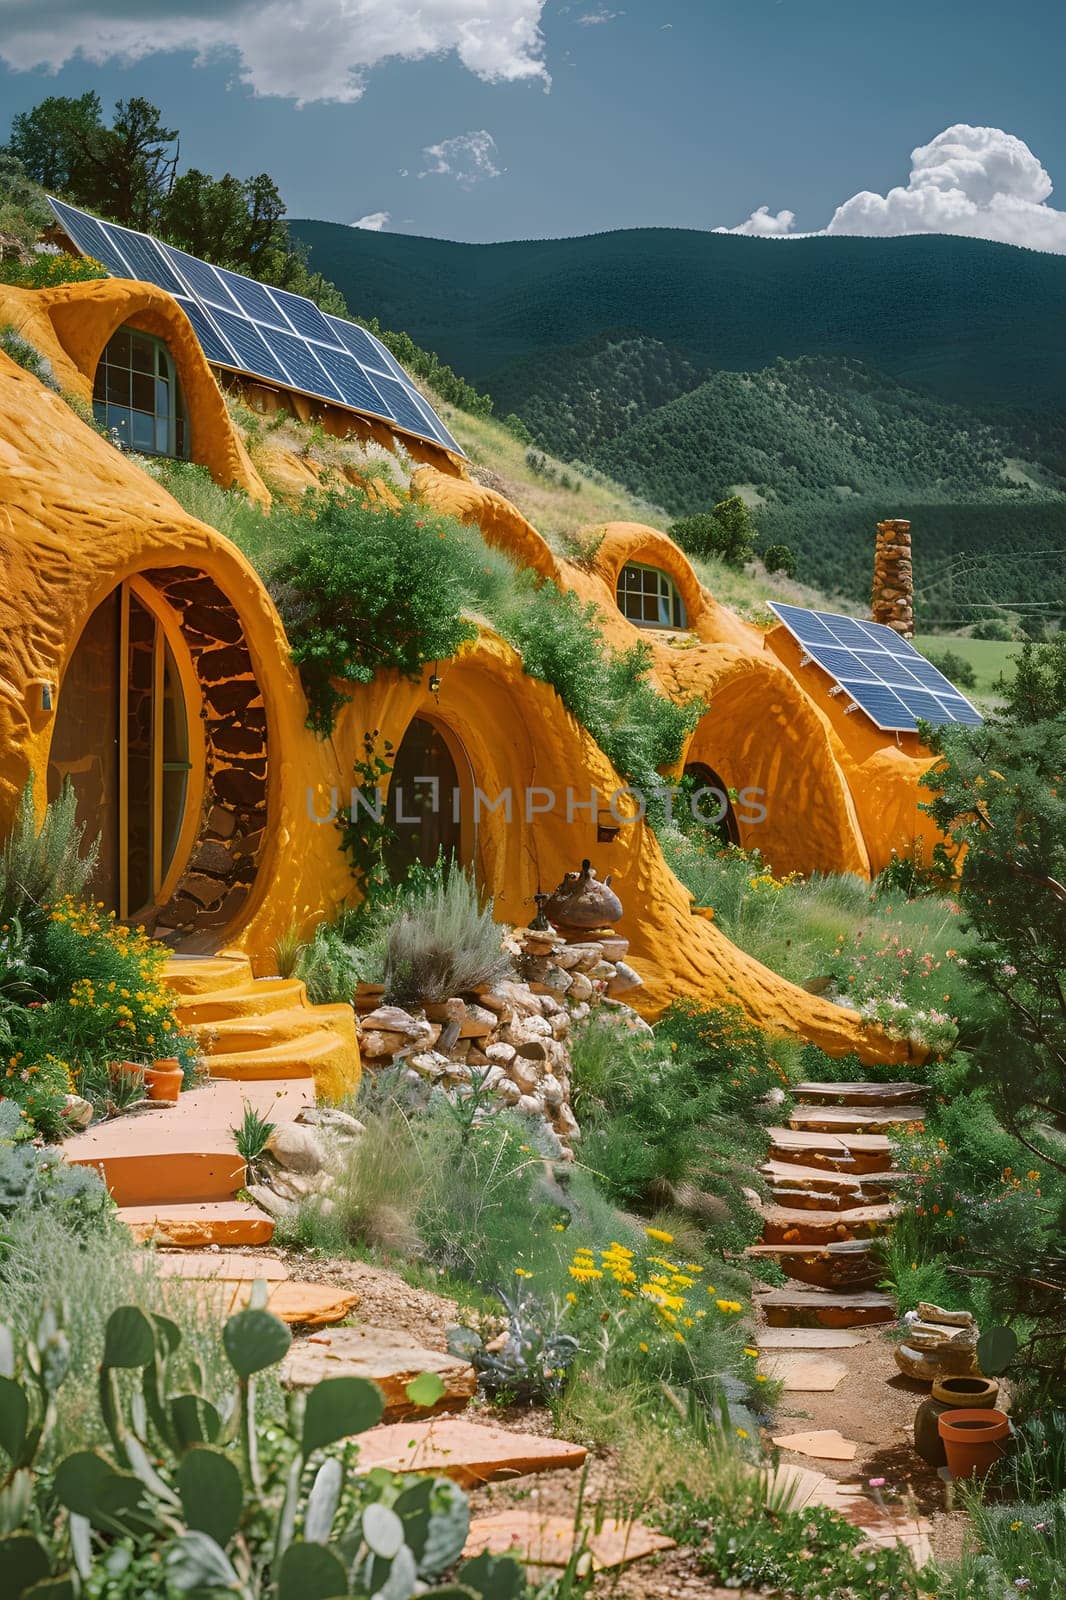 A row of yellow houses on a hill with solar panels blending into the natural landscape, surrounded by a plant community in an ecoregion with clear skies and mountains in the distance